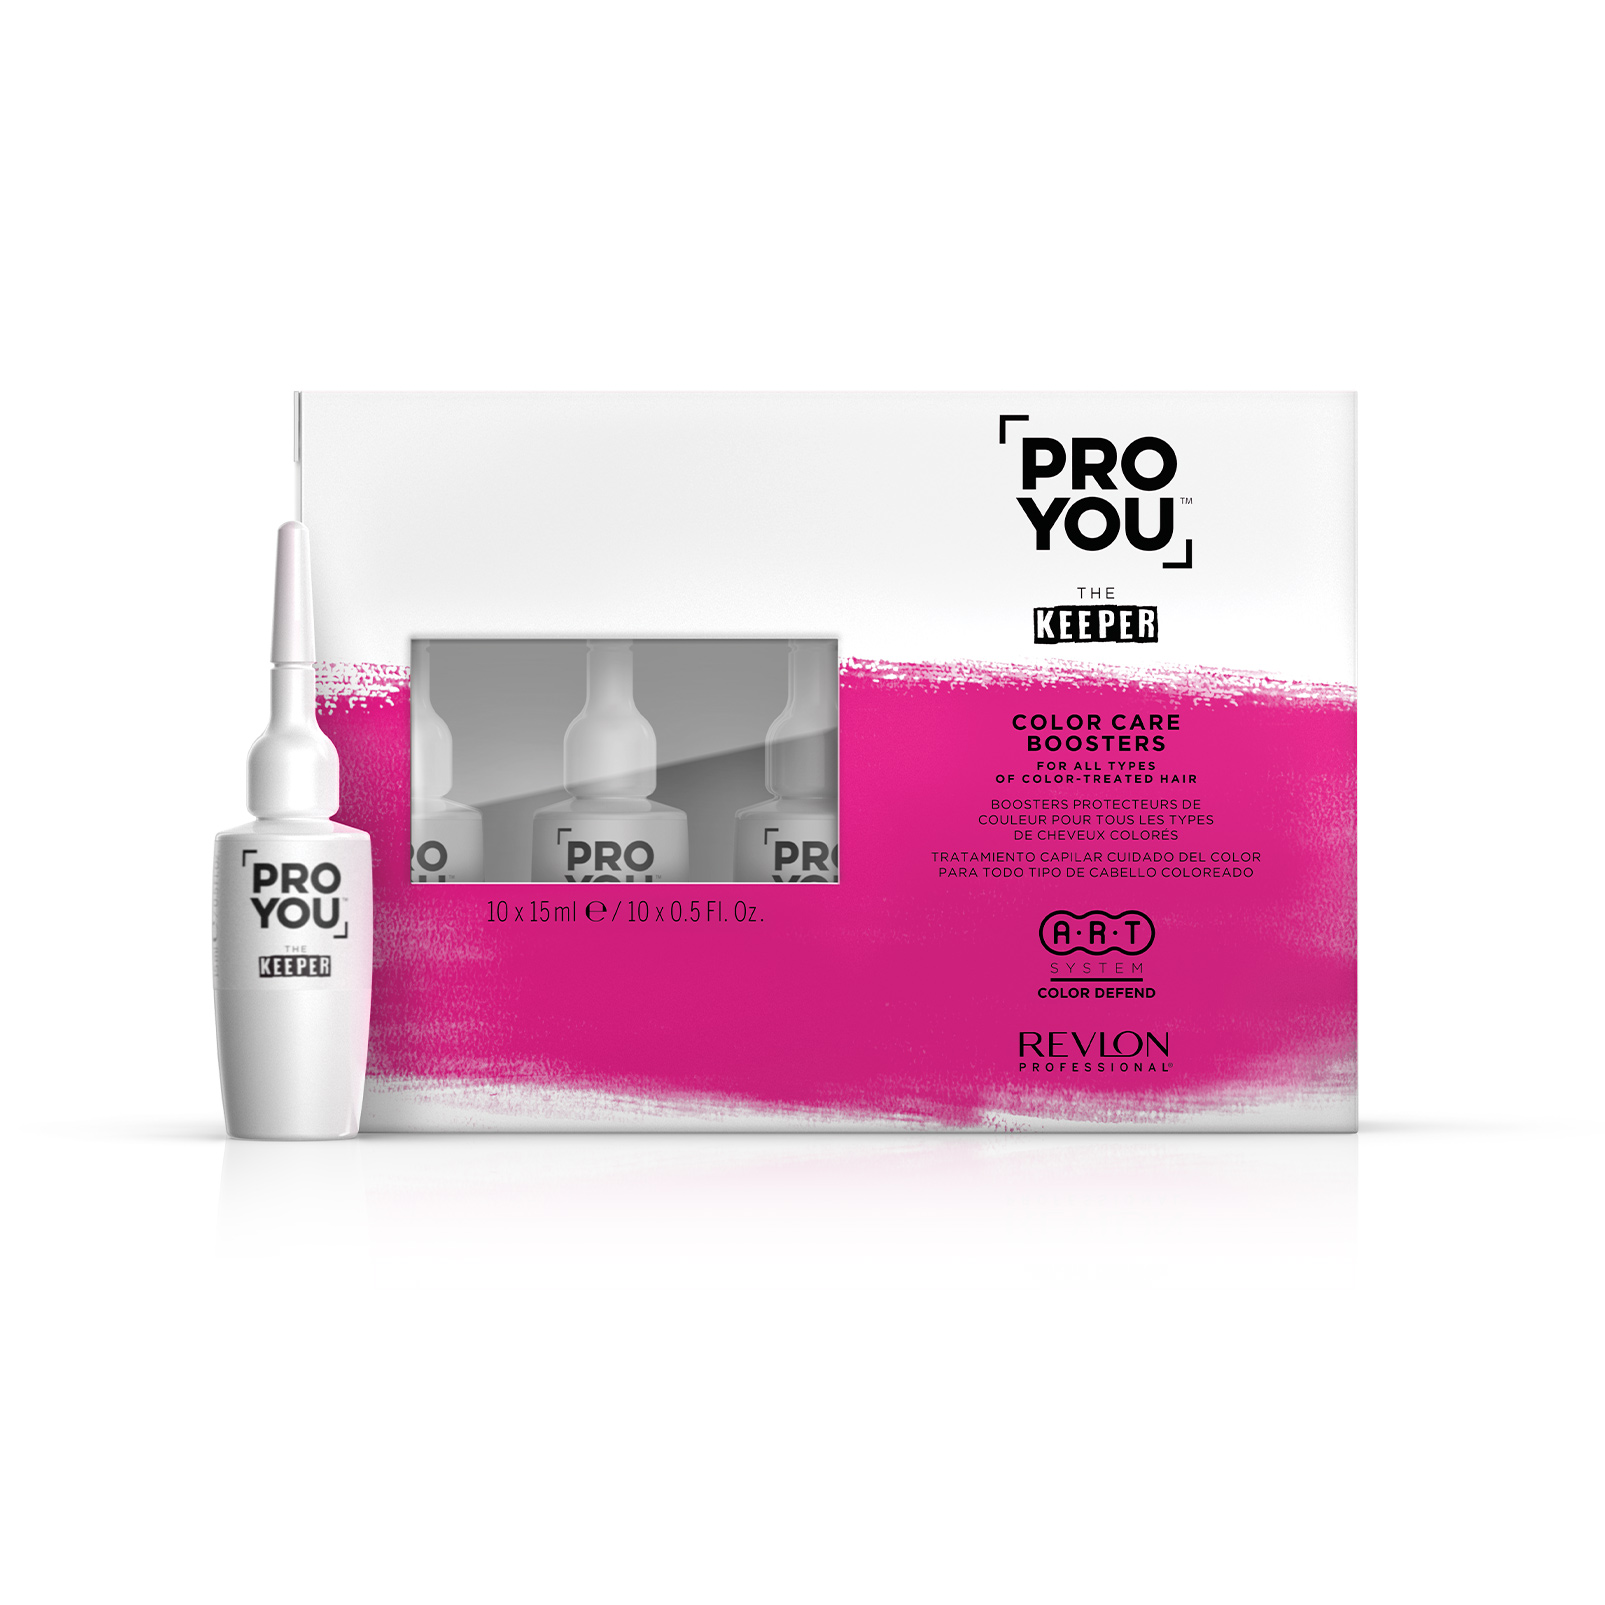 Pro You Care The Keeper Color Care Boosters